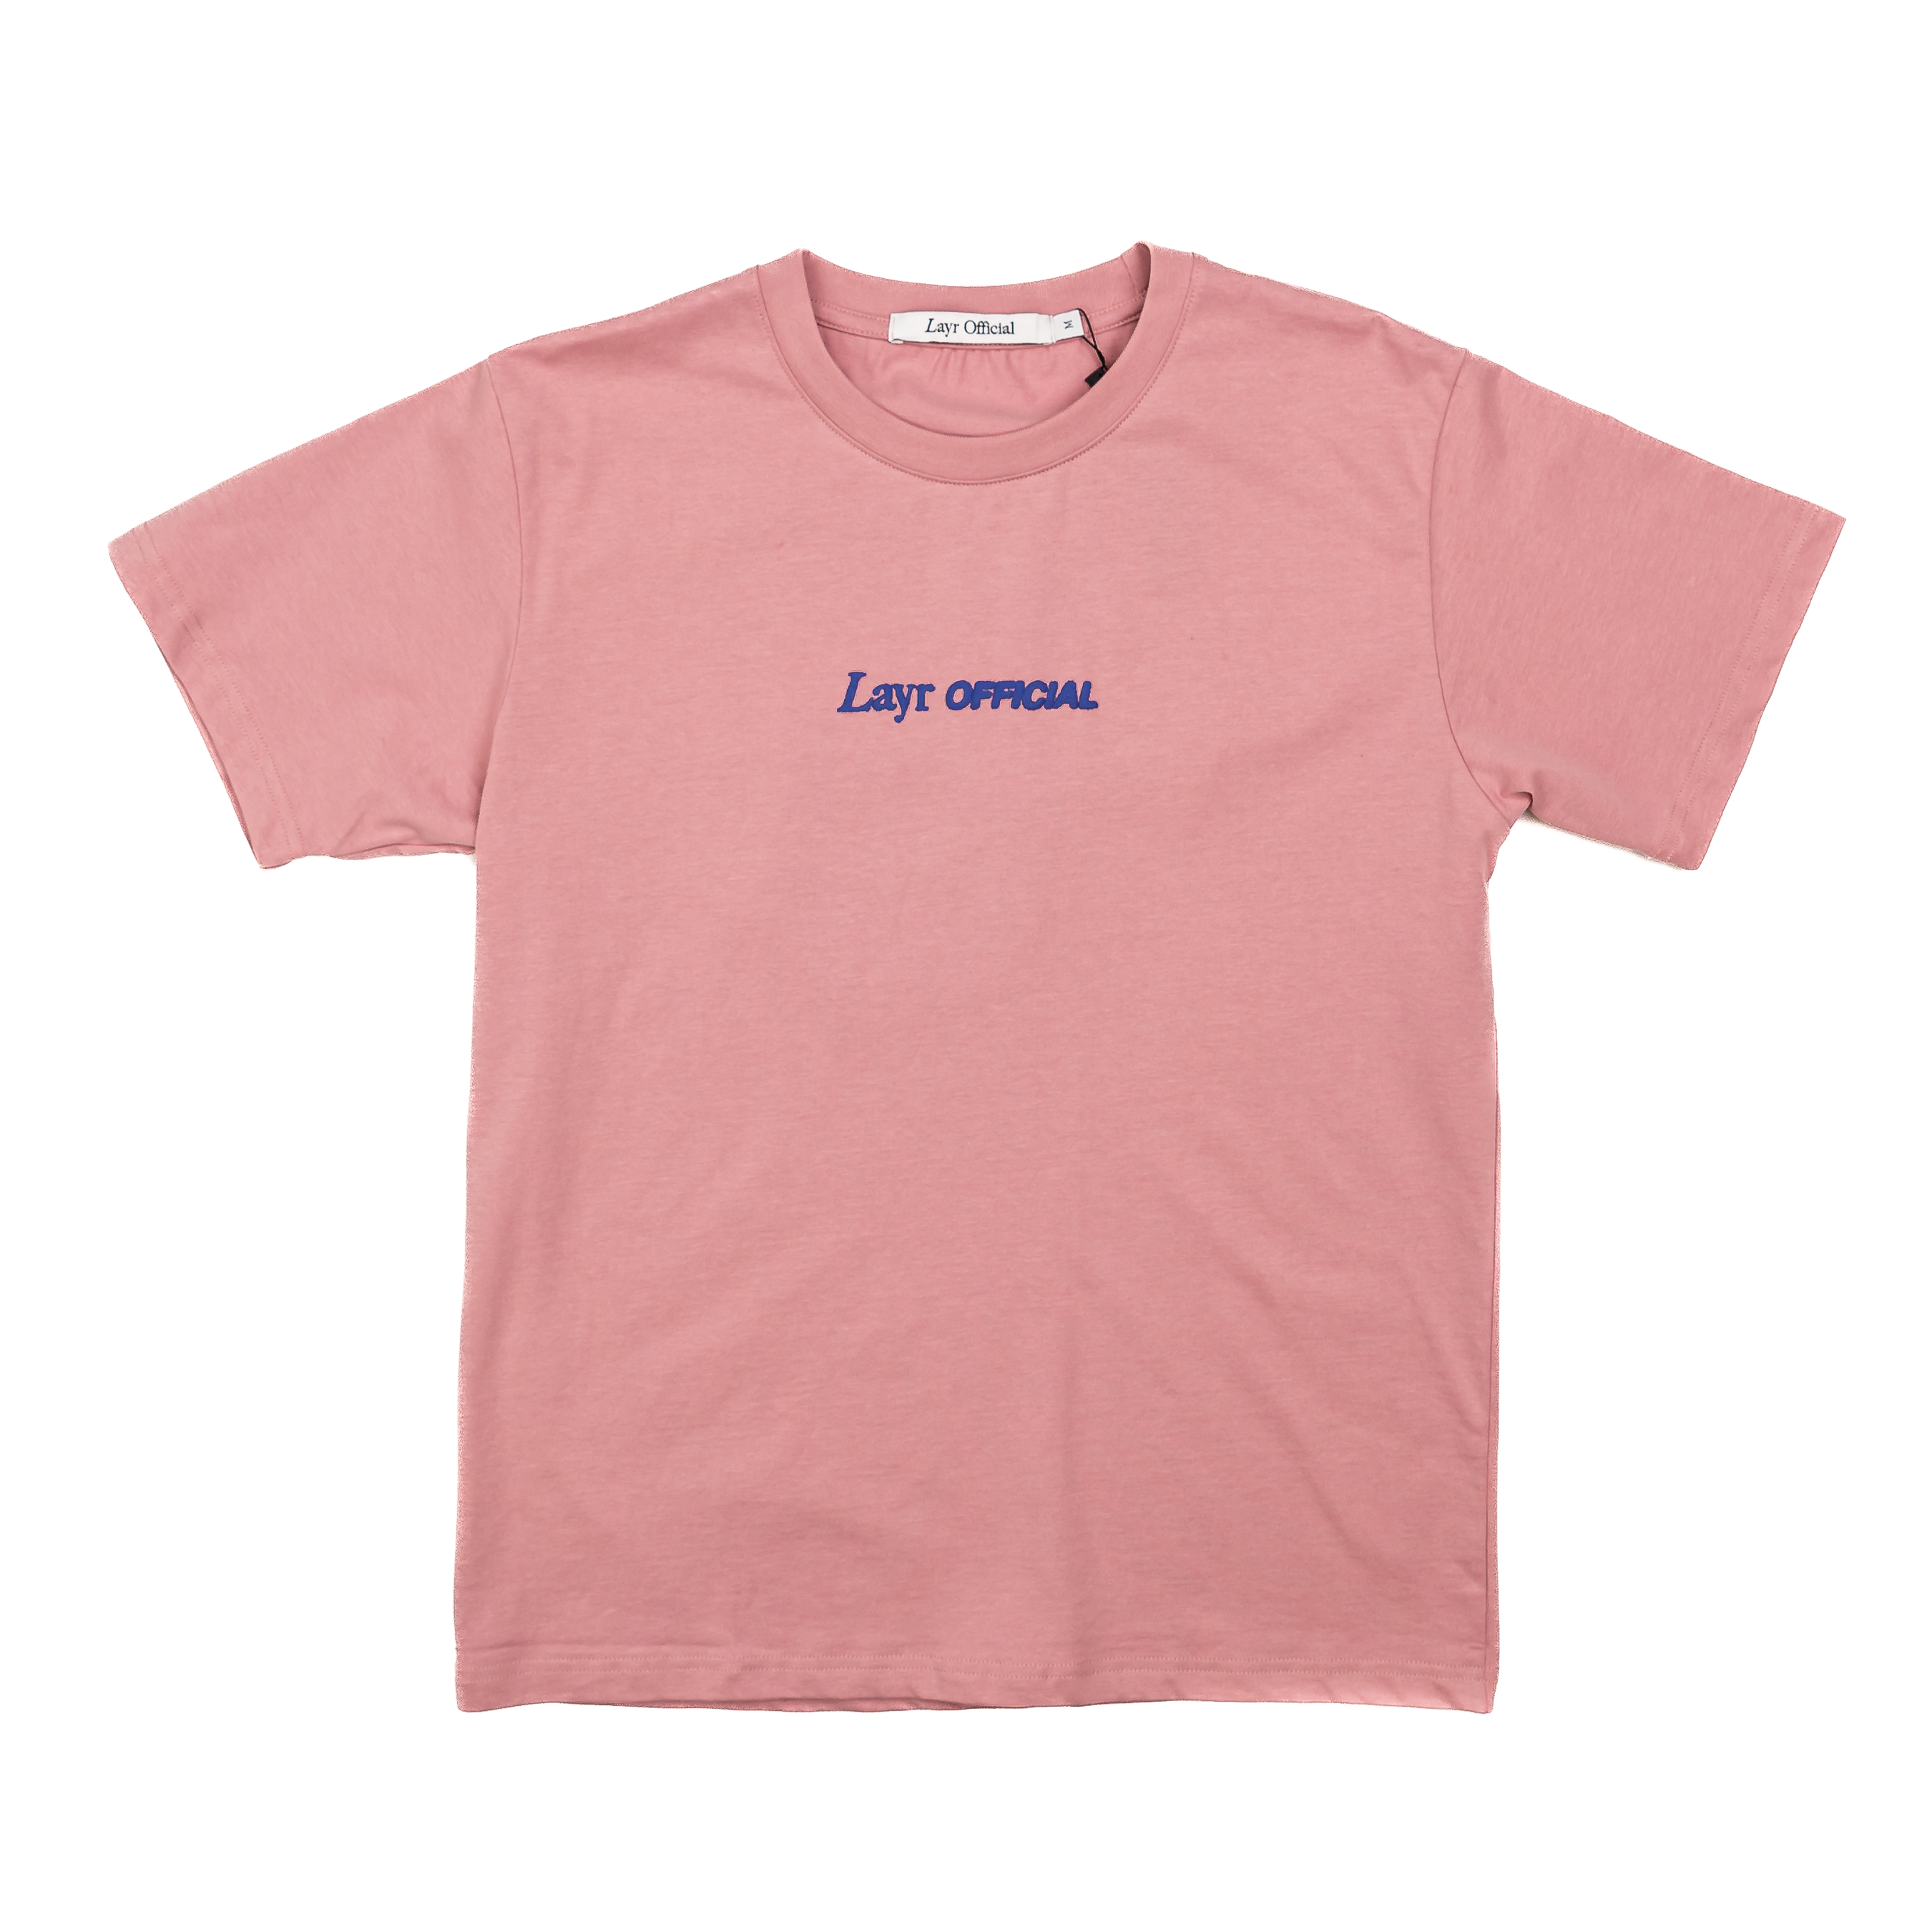 Layr Official Washed LO – Puff Pink Tee, New